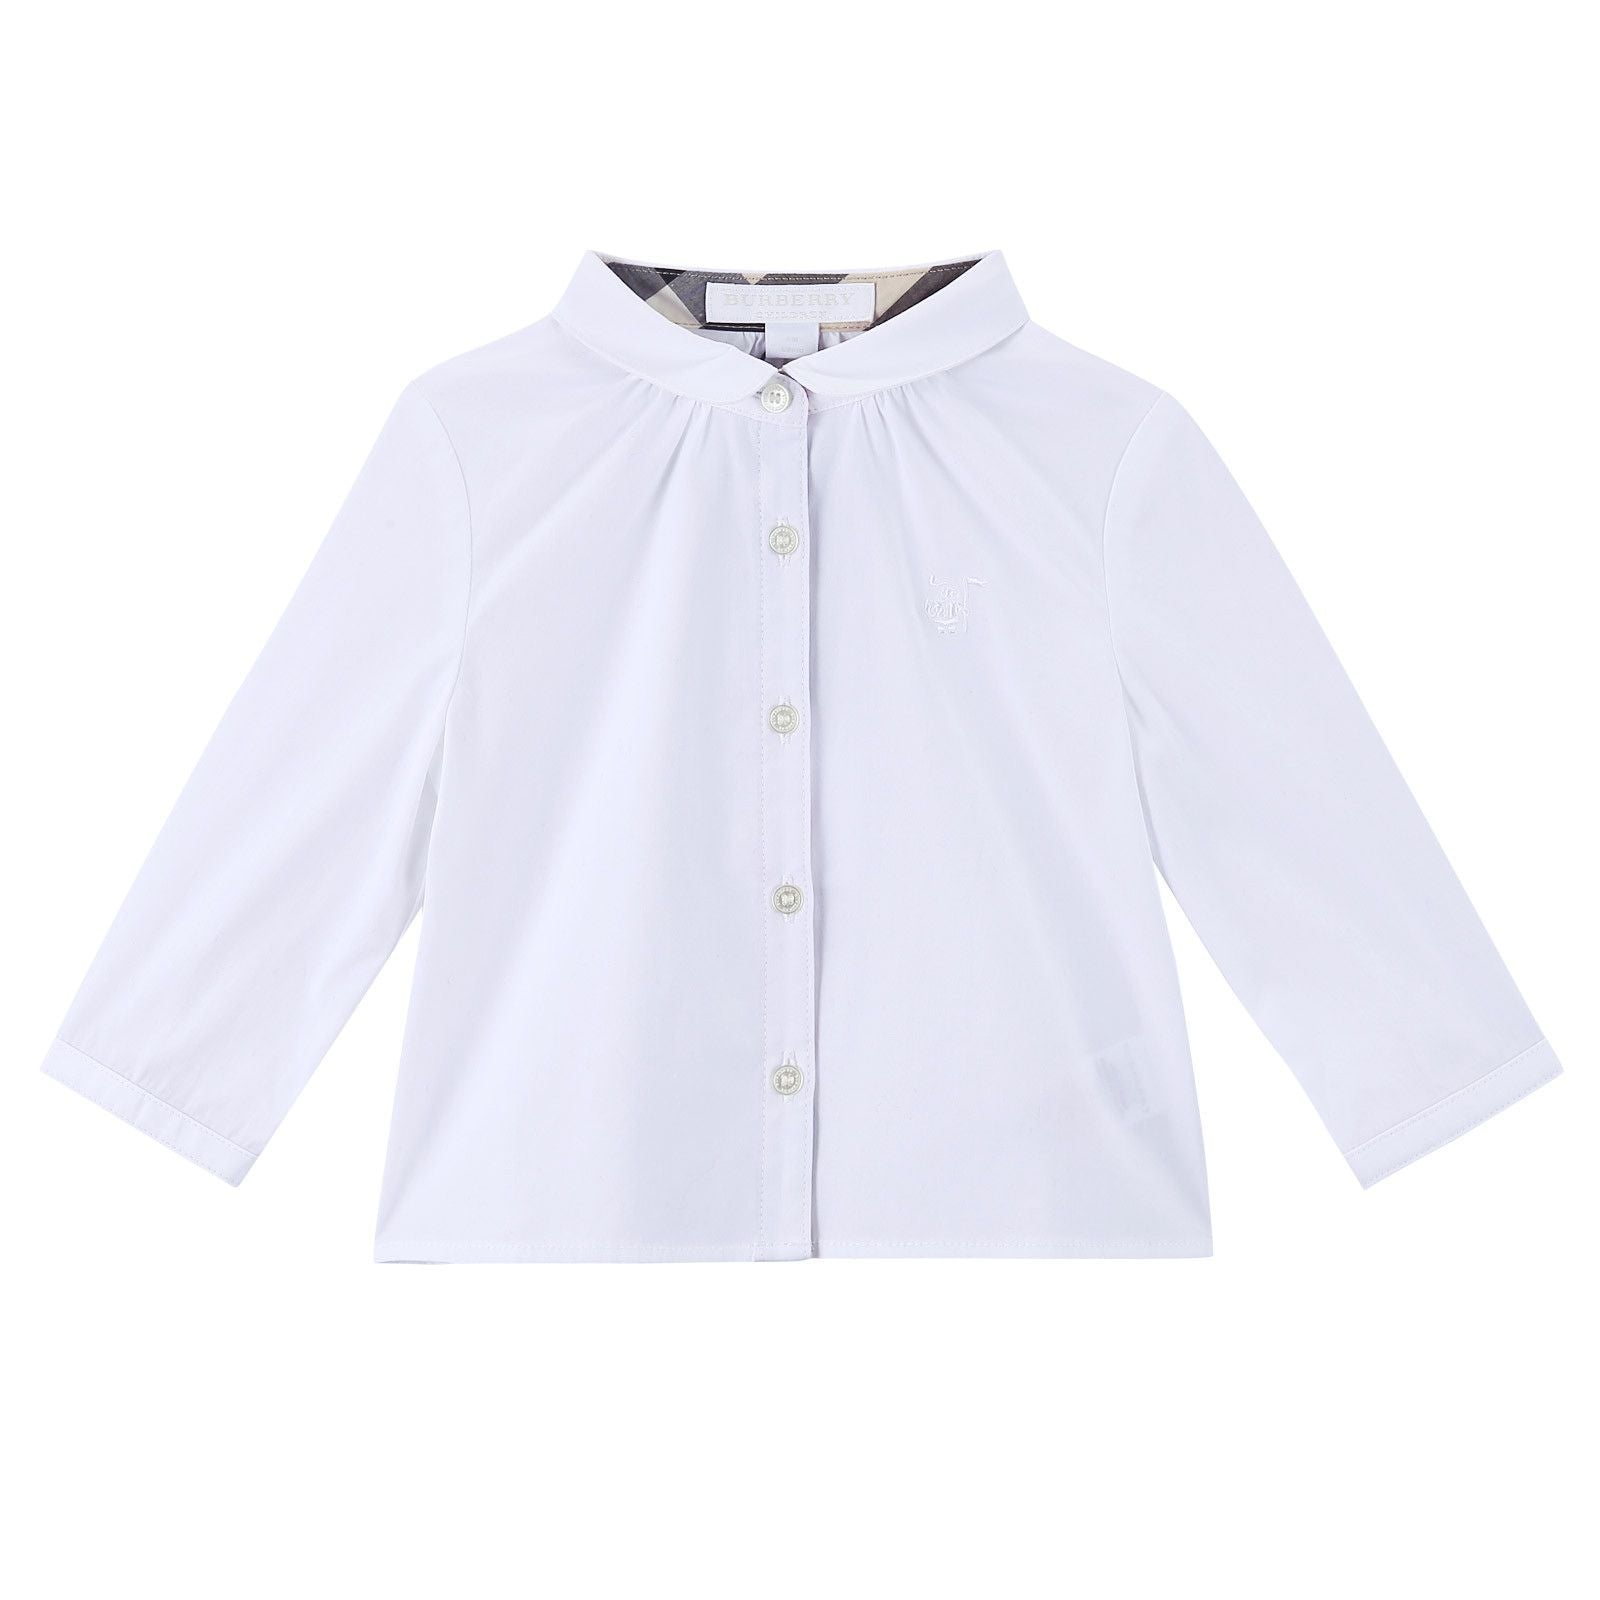 Baby Girls White Cotton Shirts With Embroidered Trims - CÉMAROSE | Children's Fashion Store - 1